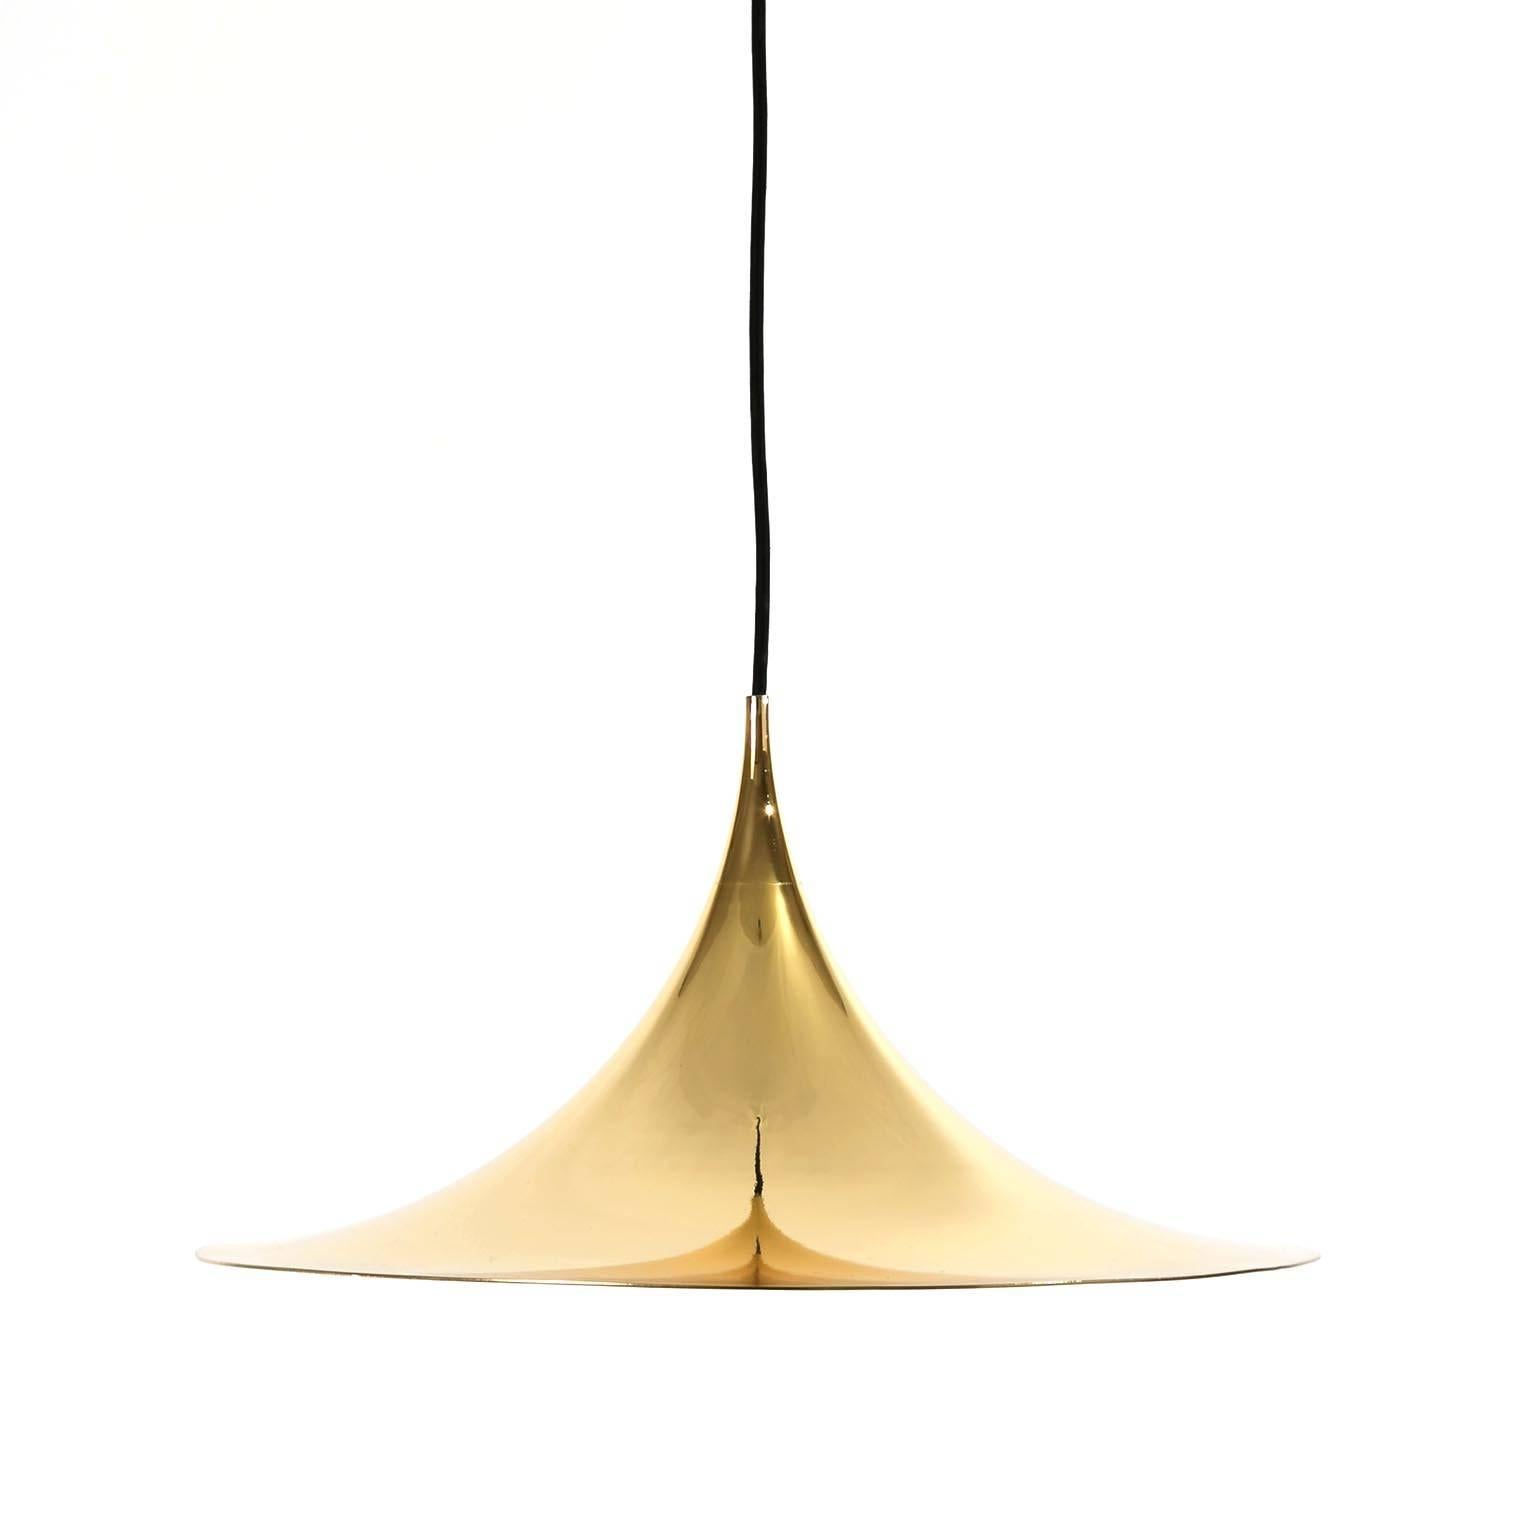 Set of five brass-plated hanging lamps by Bonderup and Thorup for Fog & Mørup, Denmark, circa 1968. 
Newly rewired. One medium base bulb (100W max).
Excellent condition, restored: Newly brass-replated outside, the inner side has been repainted